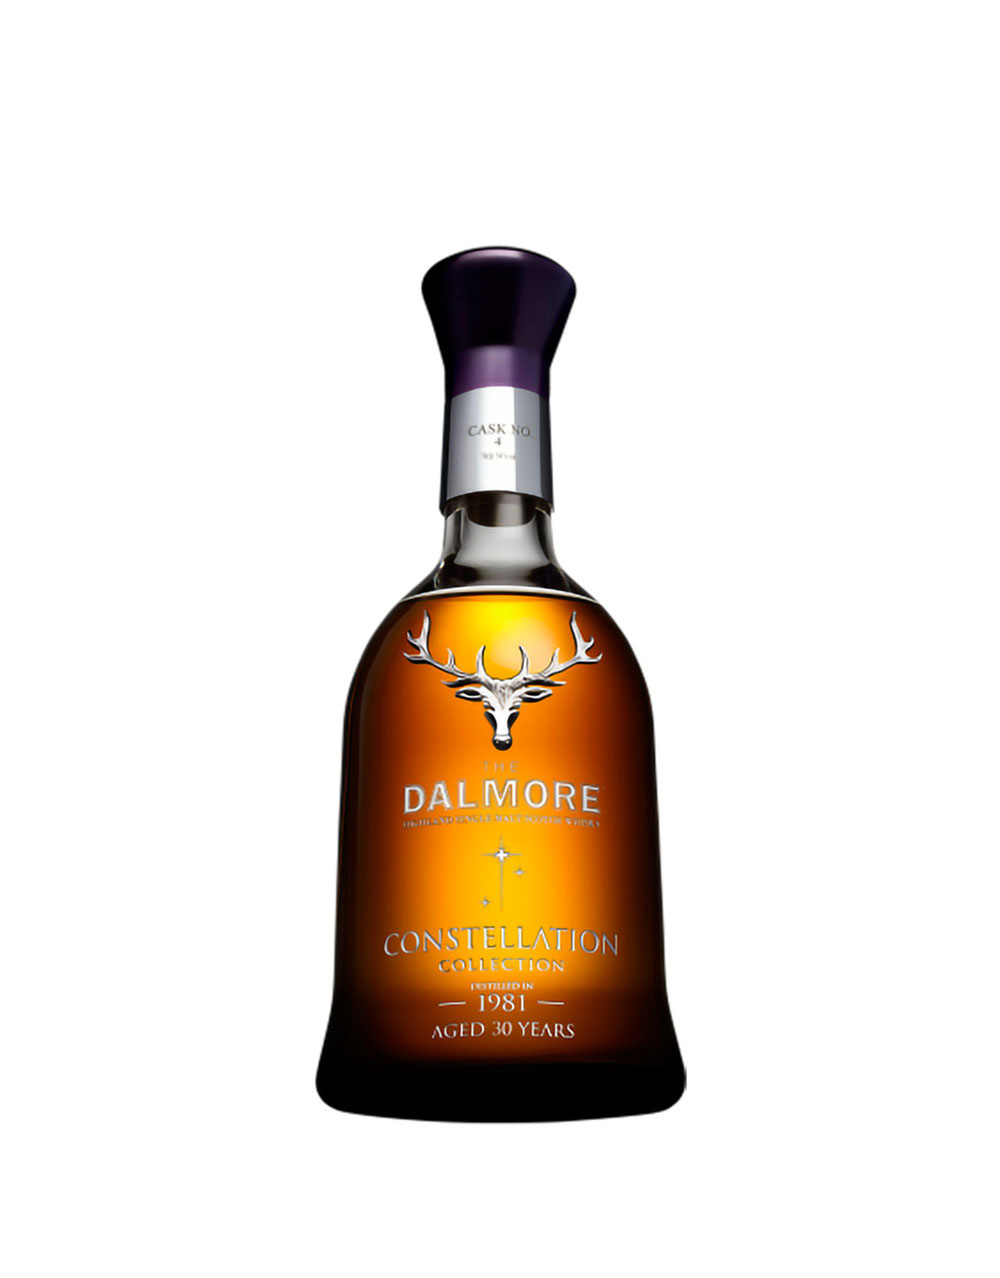 The Dalmore 1981 Constellation Collection